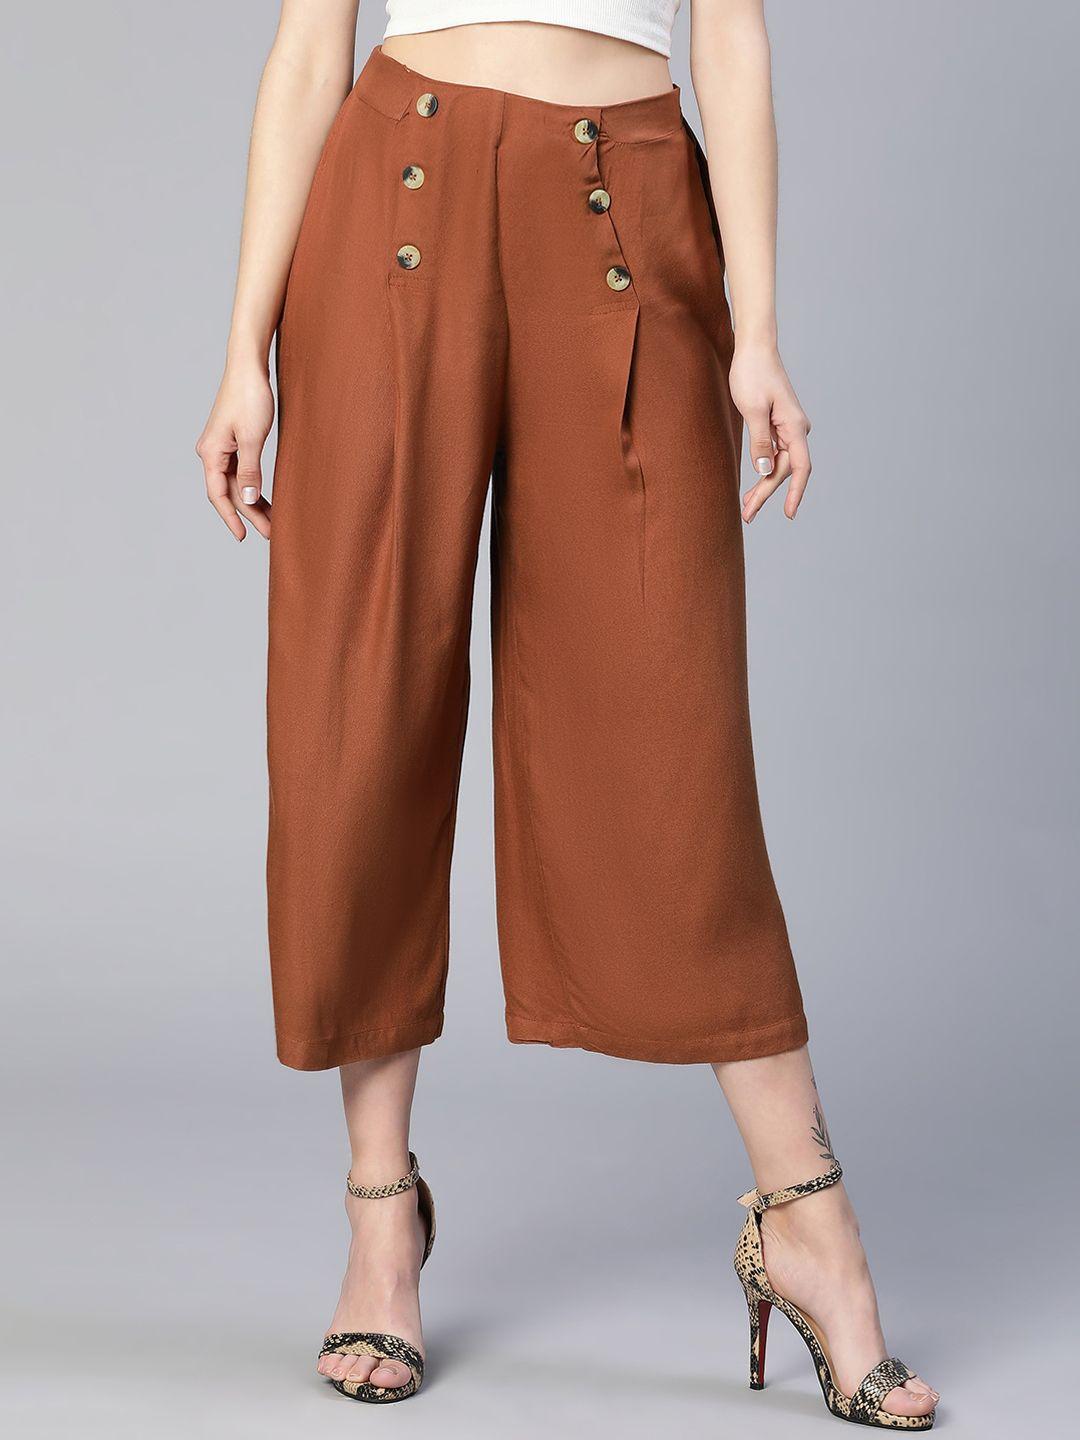 oxolloxo-button-detail-relaxed-straight-leg-culottes